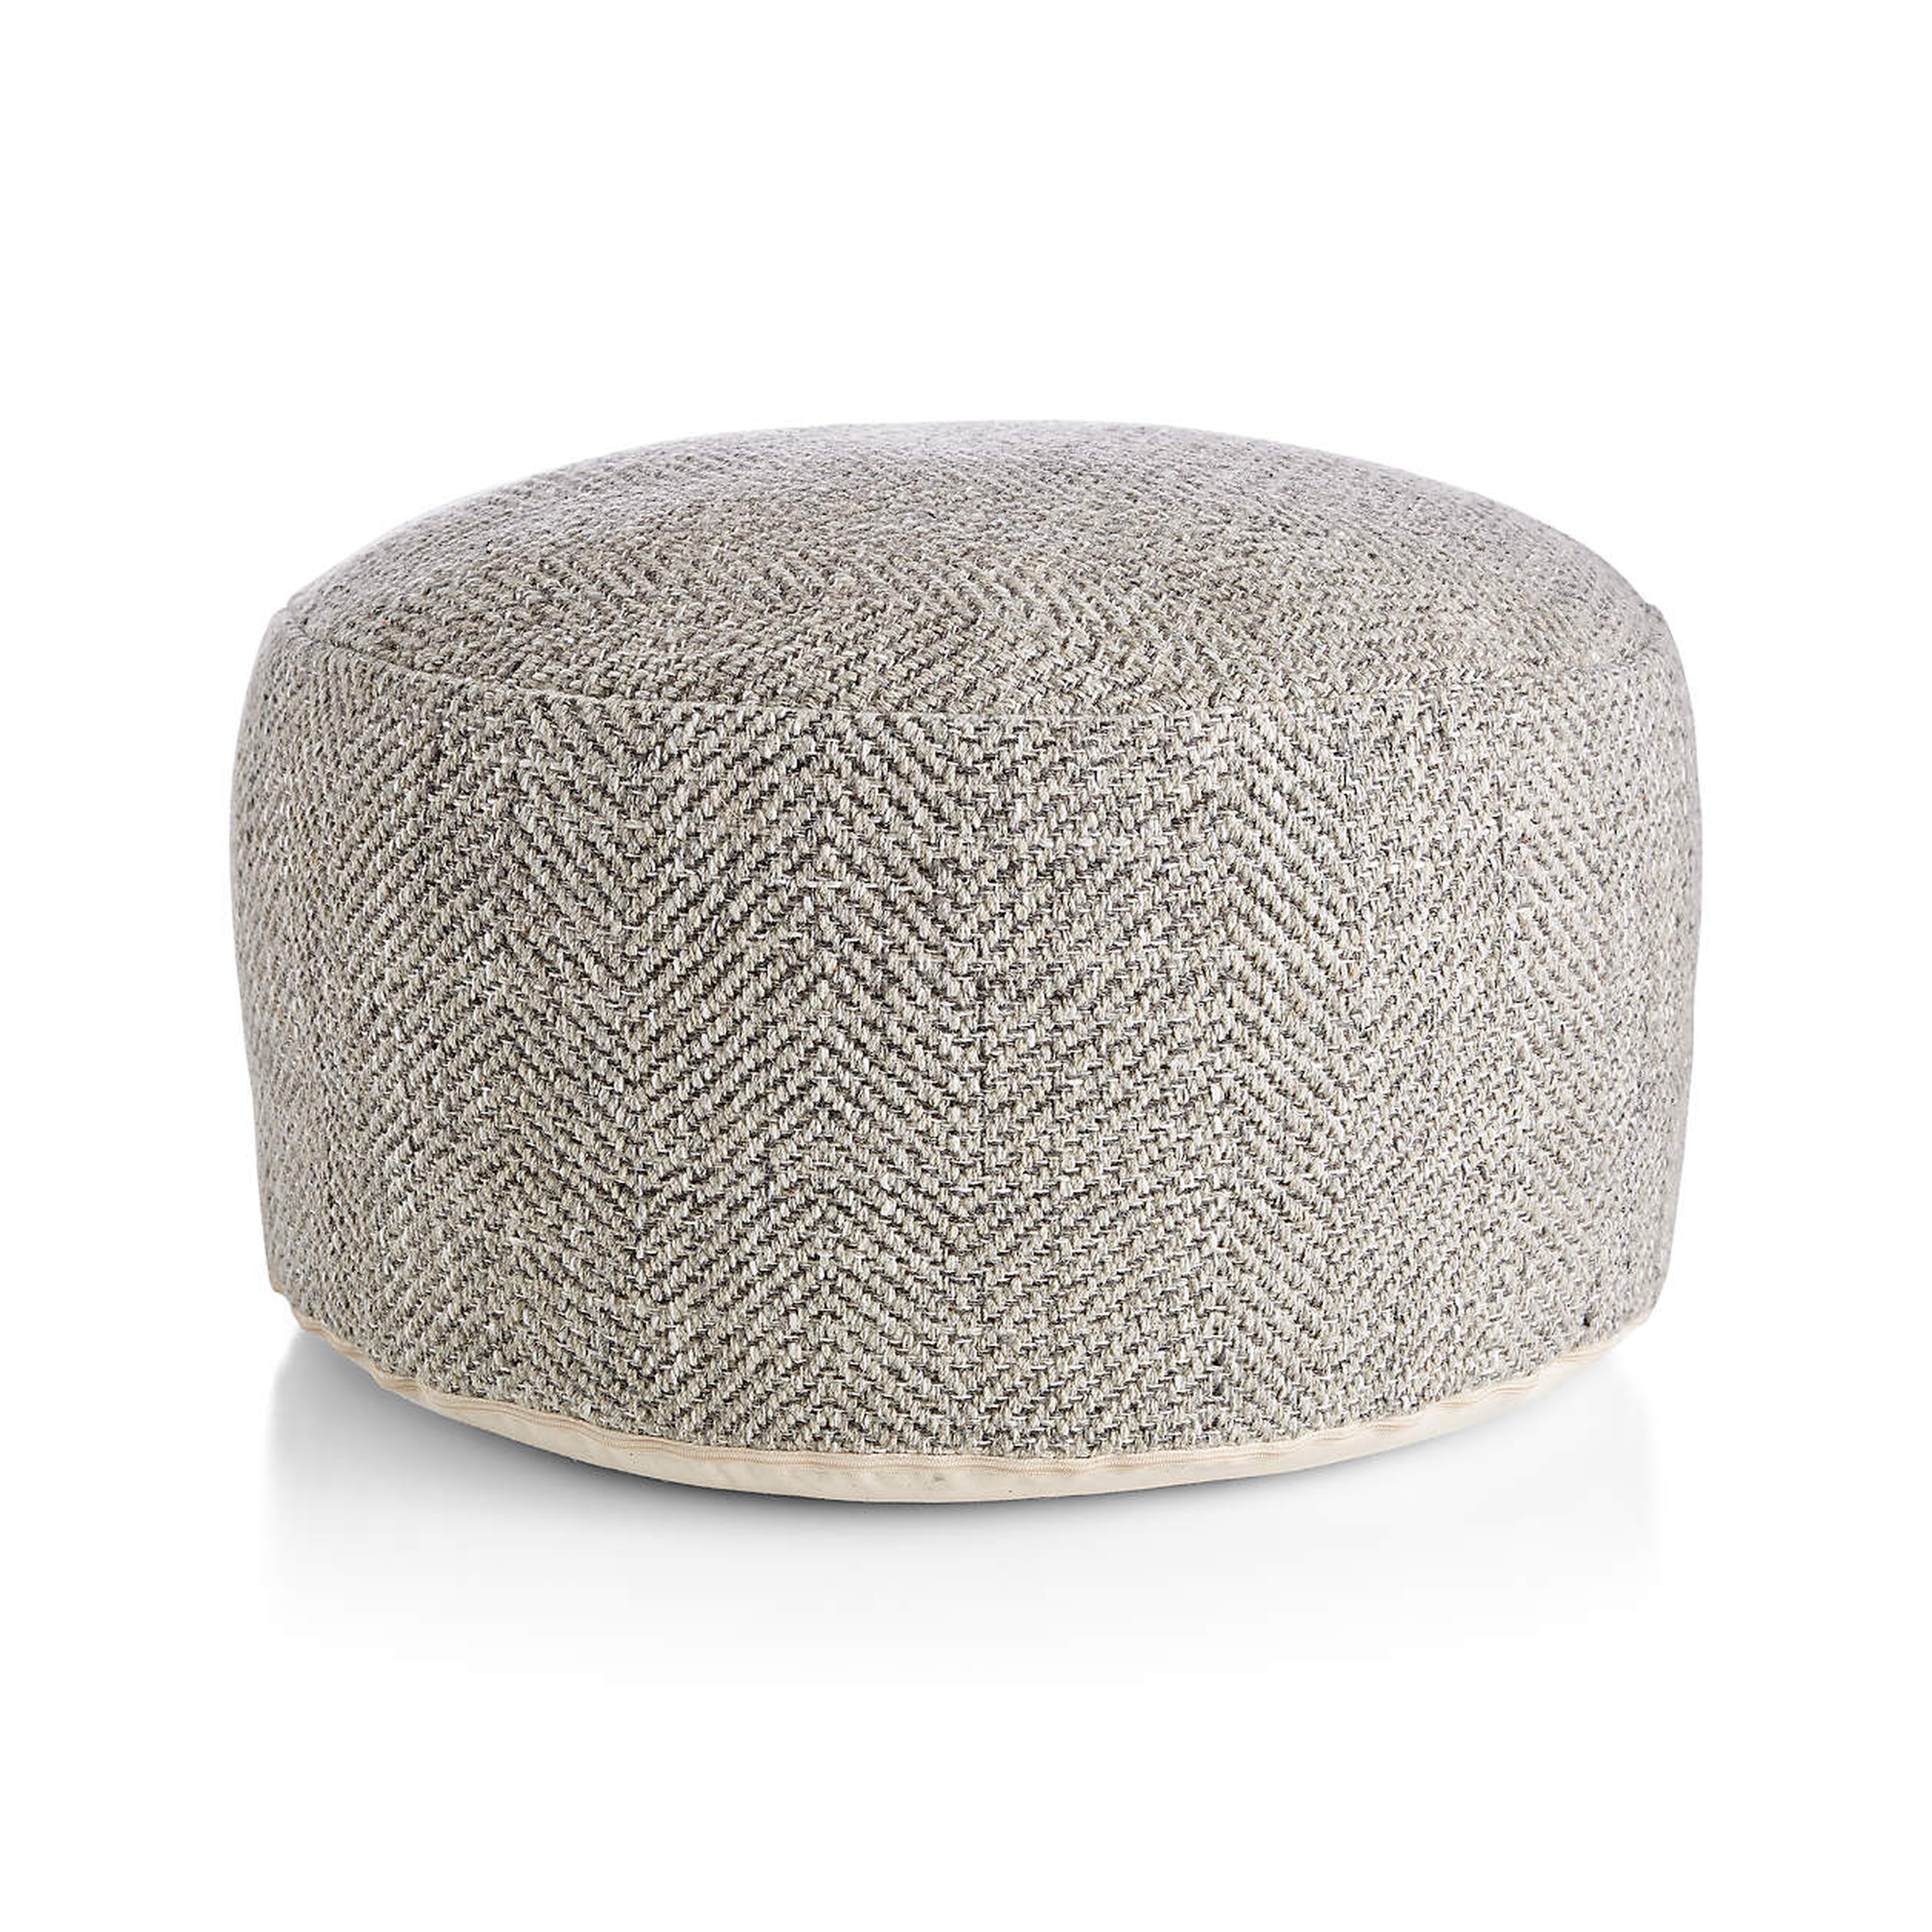 Fergus Round Pouf, 30" - Crate and Barrel